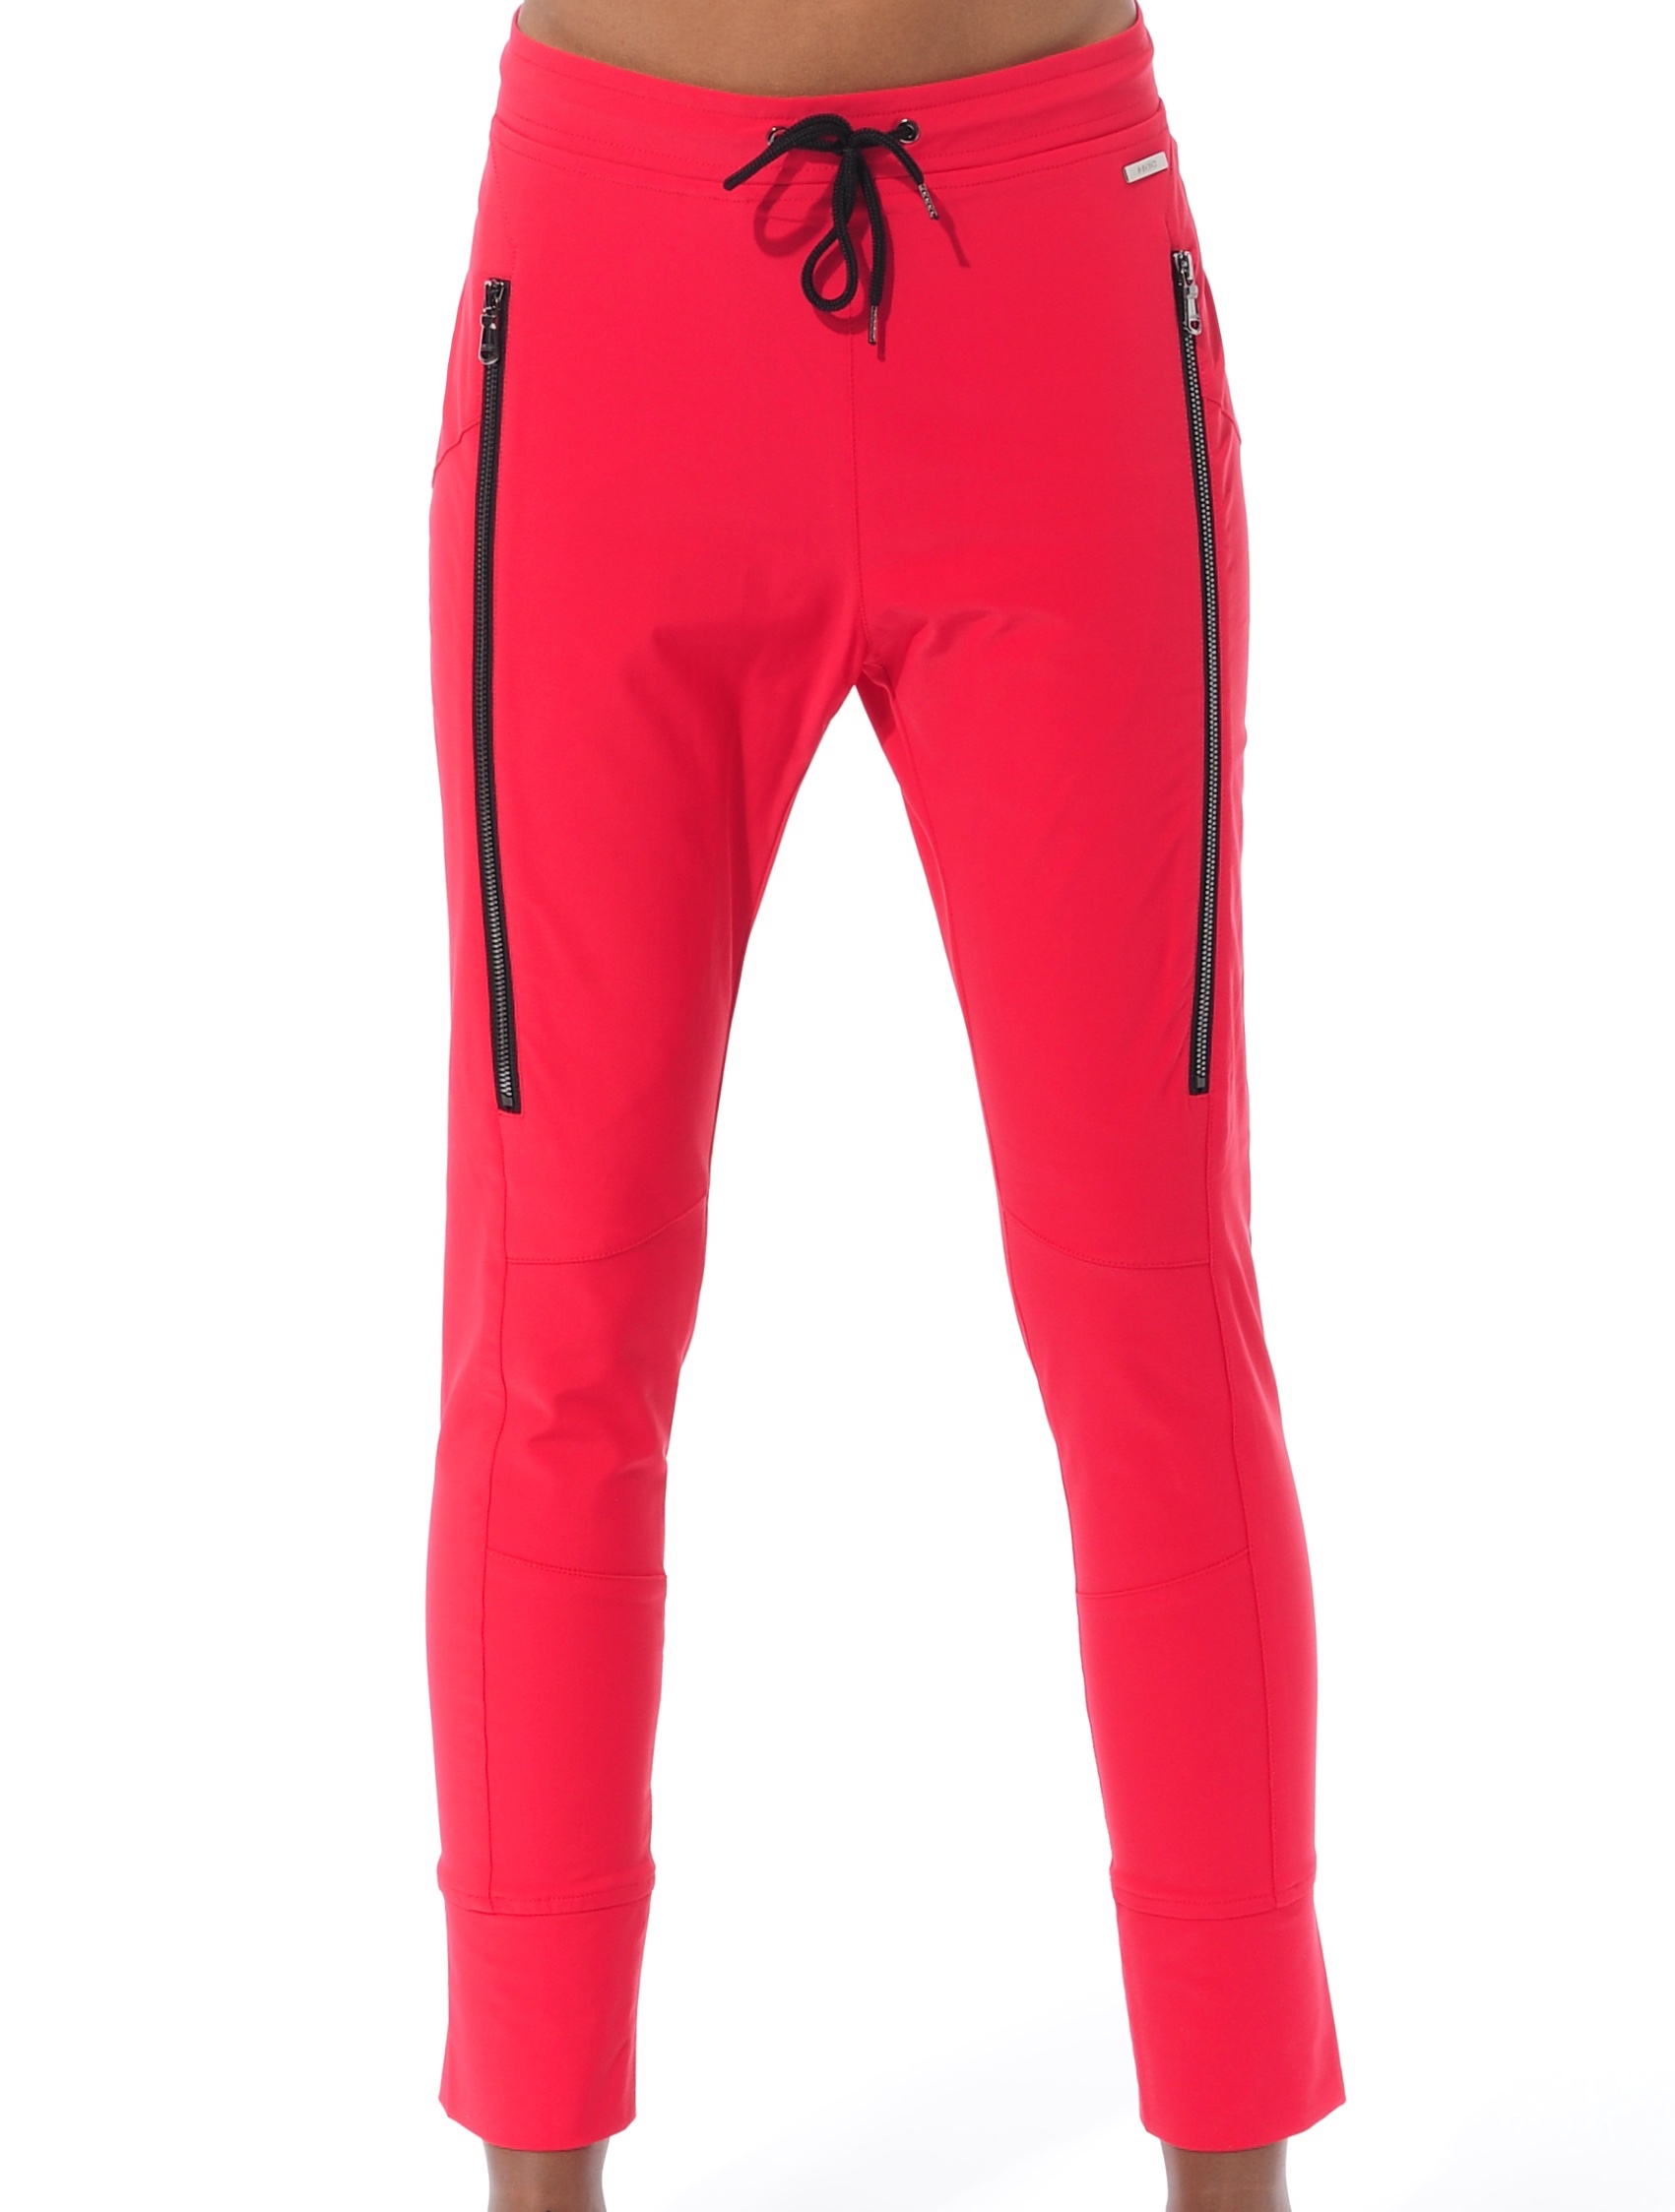 4way stretch jag pants red 